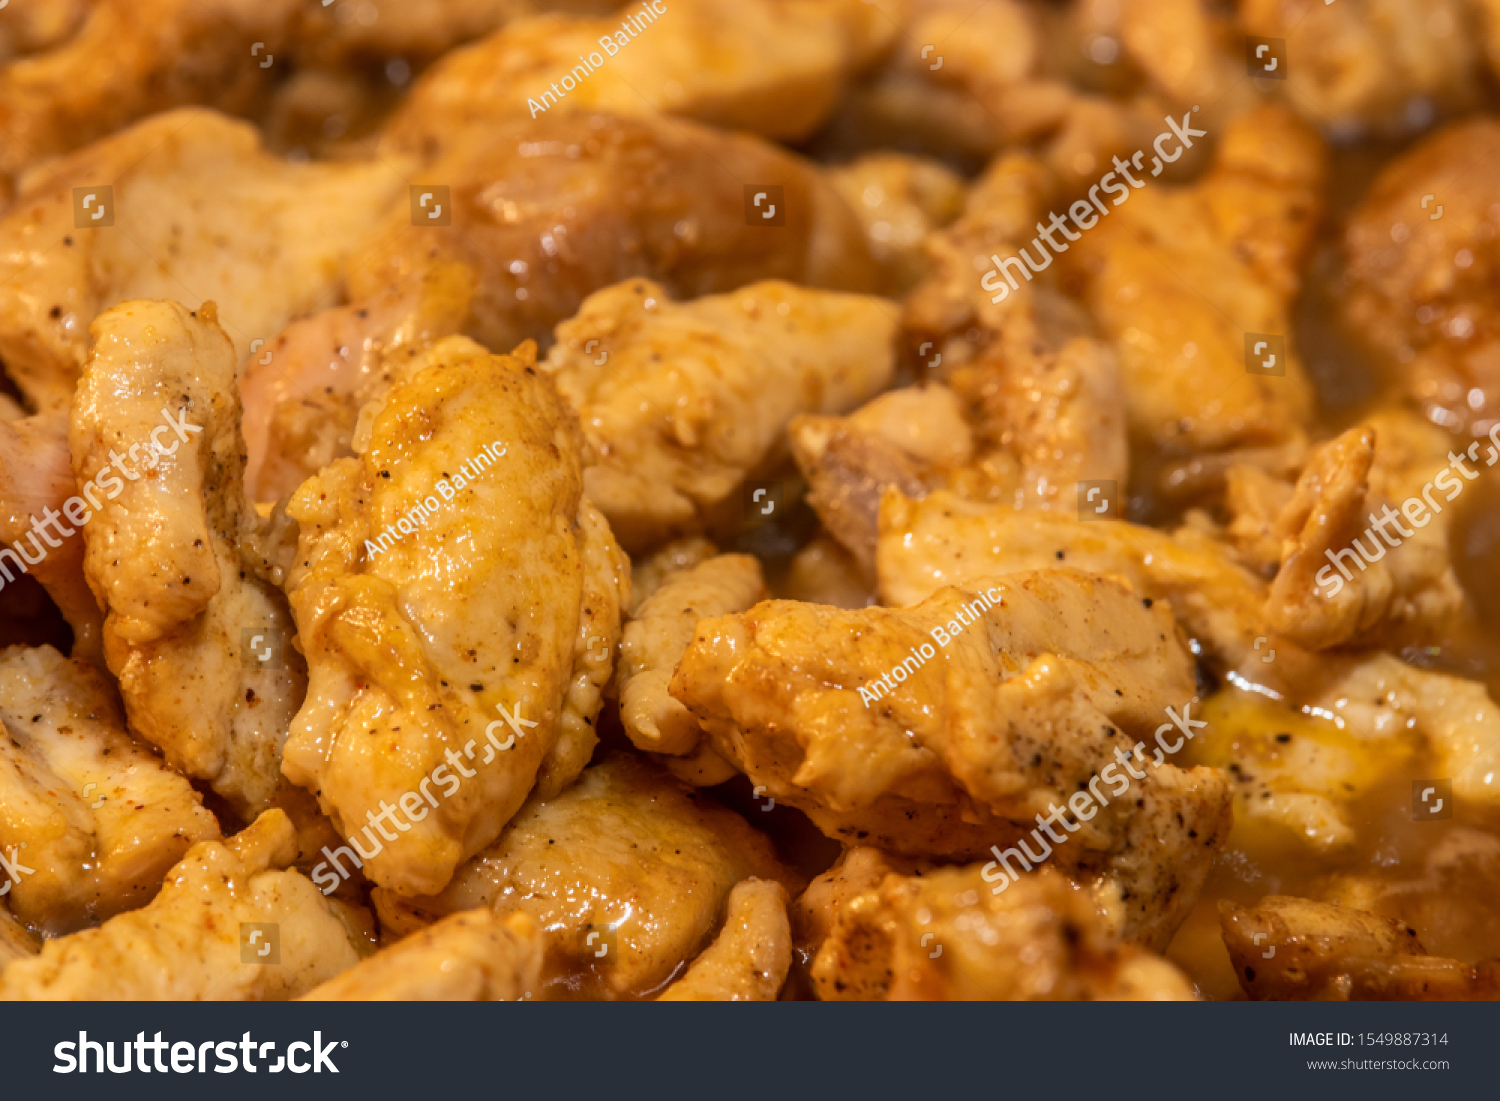 Marinated torn cut chicken bits being cooked, halfway cooked #1549887314